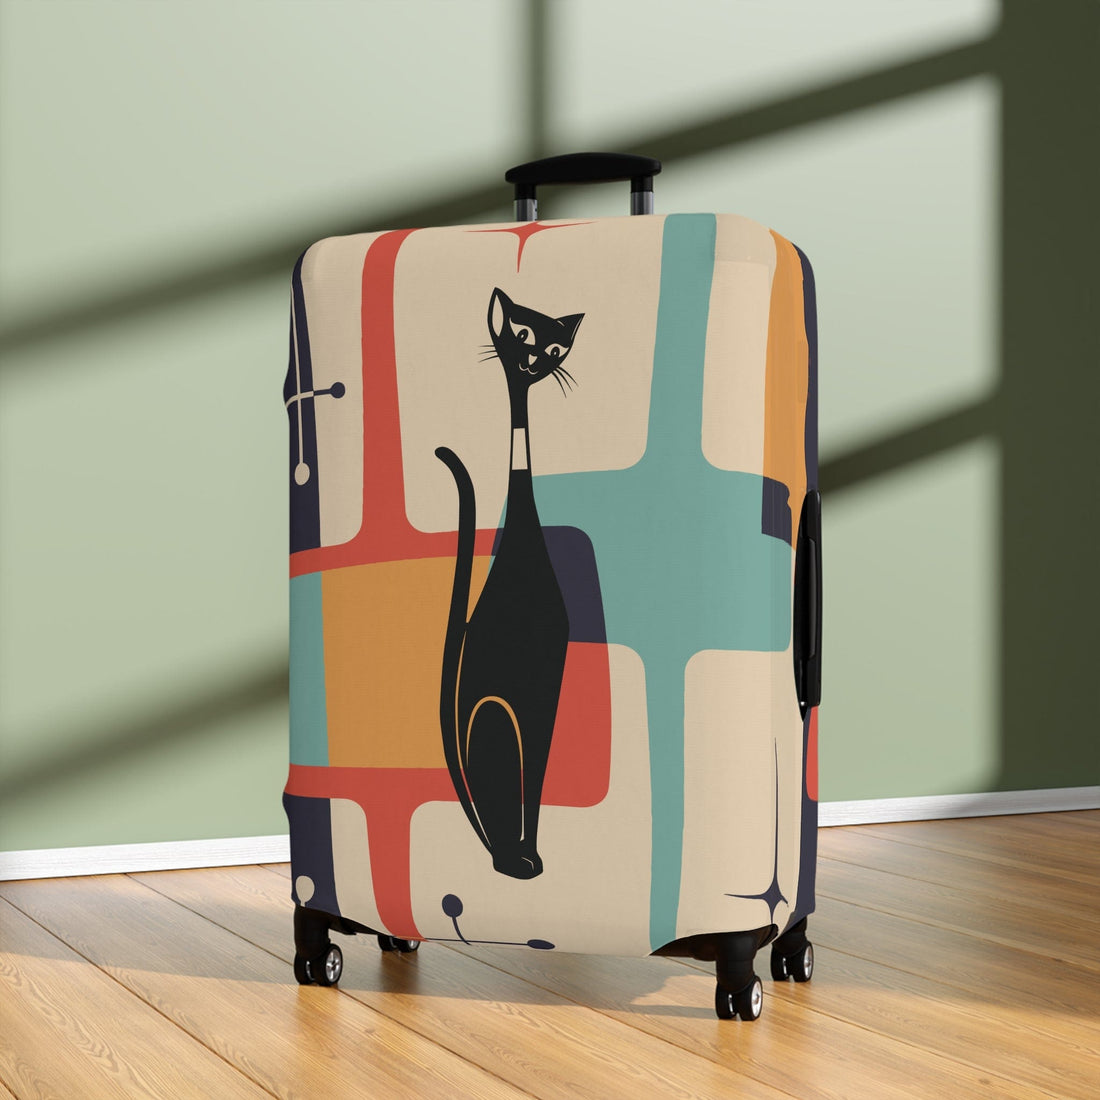 Kate McEnroe New York Retro Atomic Cat Luggage Cover, Mid - Century Teal &amp; Mustard Design, Vintage Style Suitcase ProtectorLuggage Covers30286704463193872923